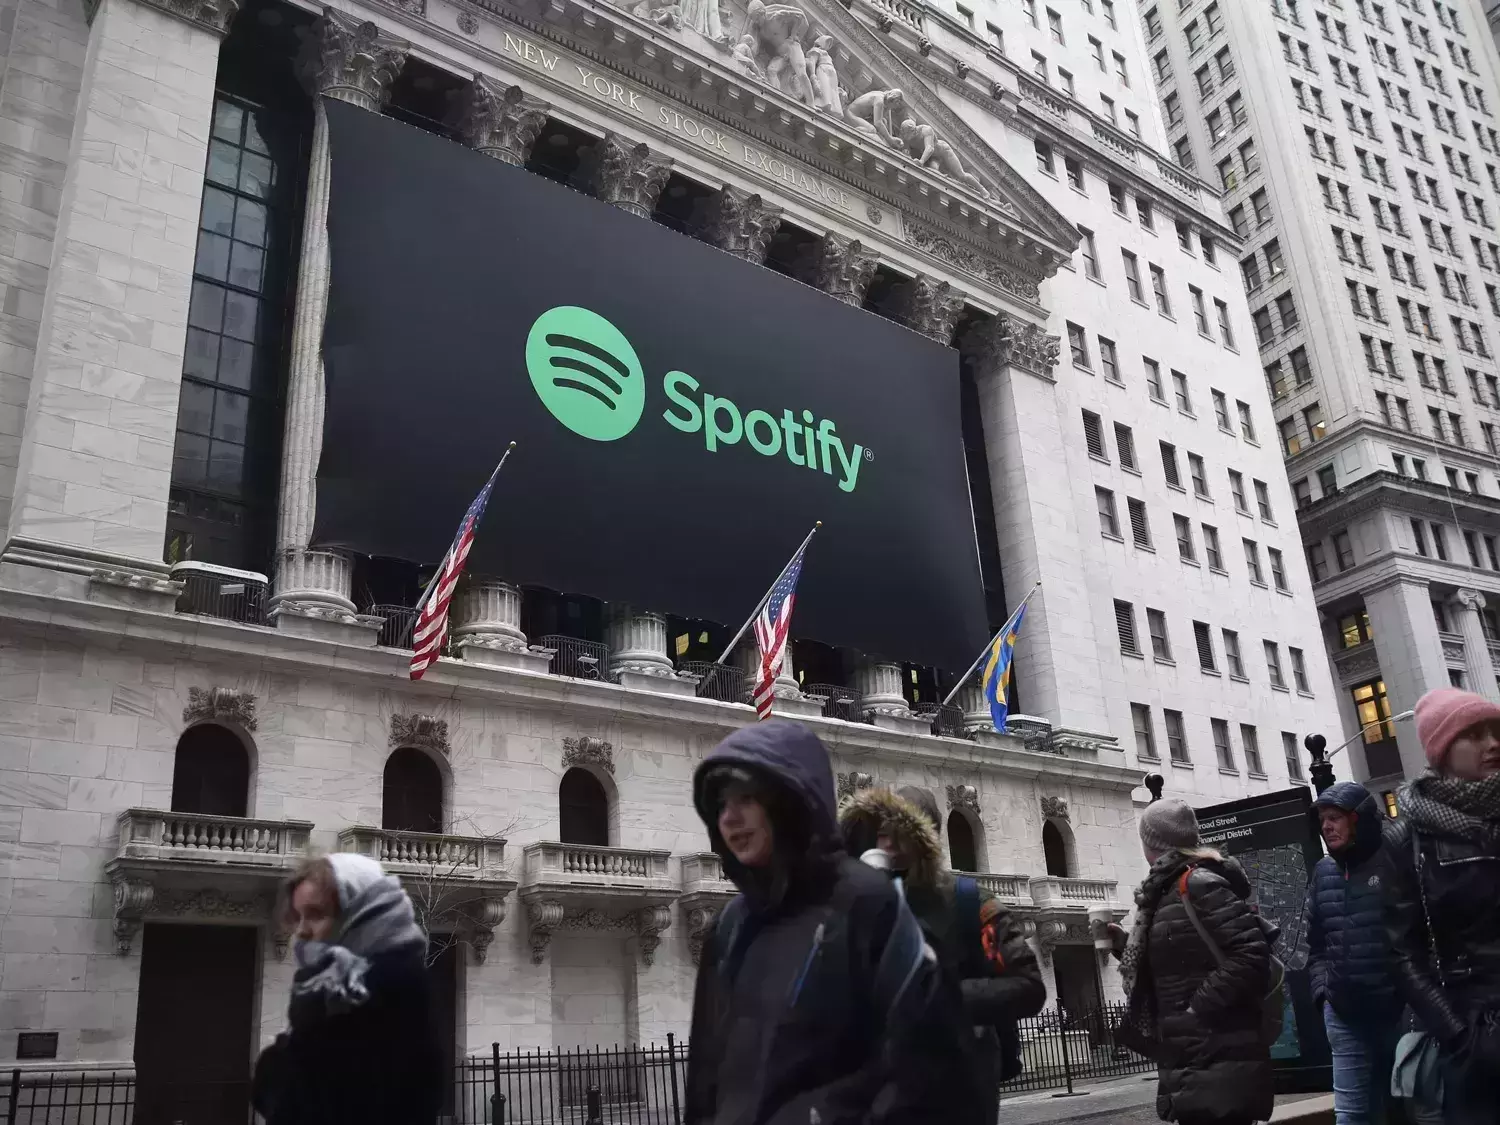 Spotify to launch feature for posting audio reactions to music playlists